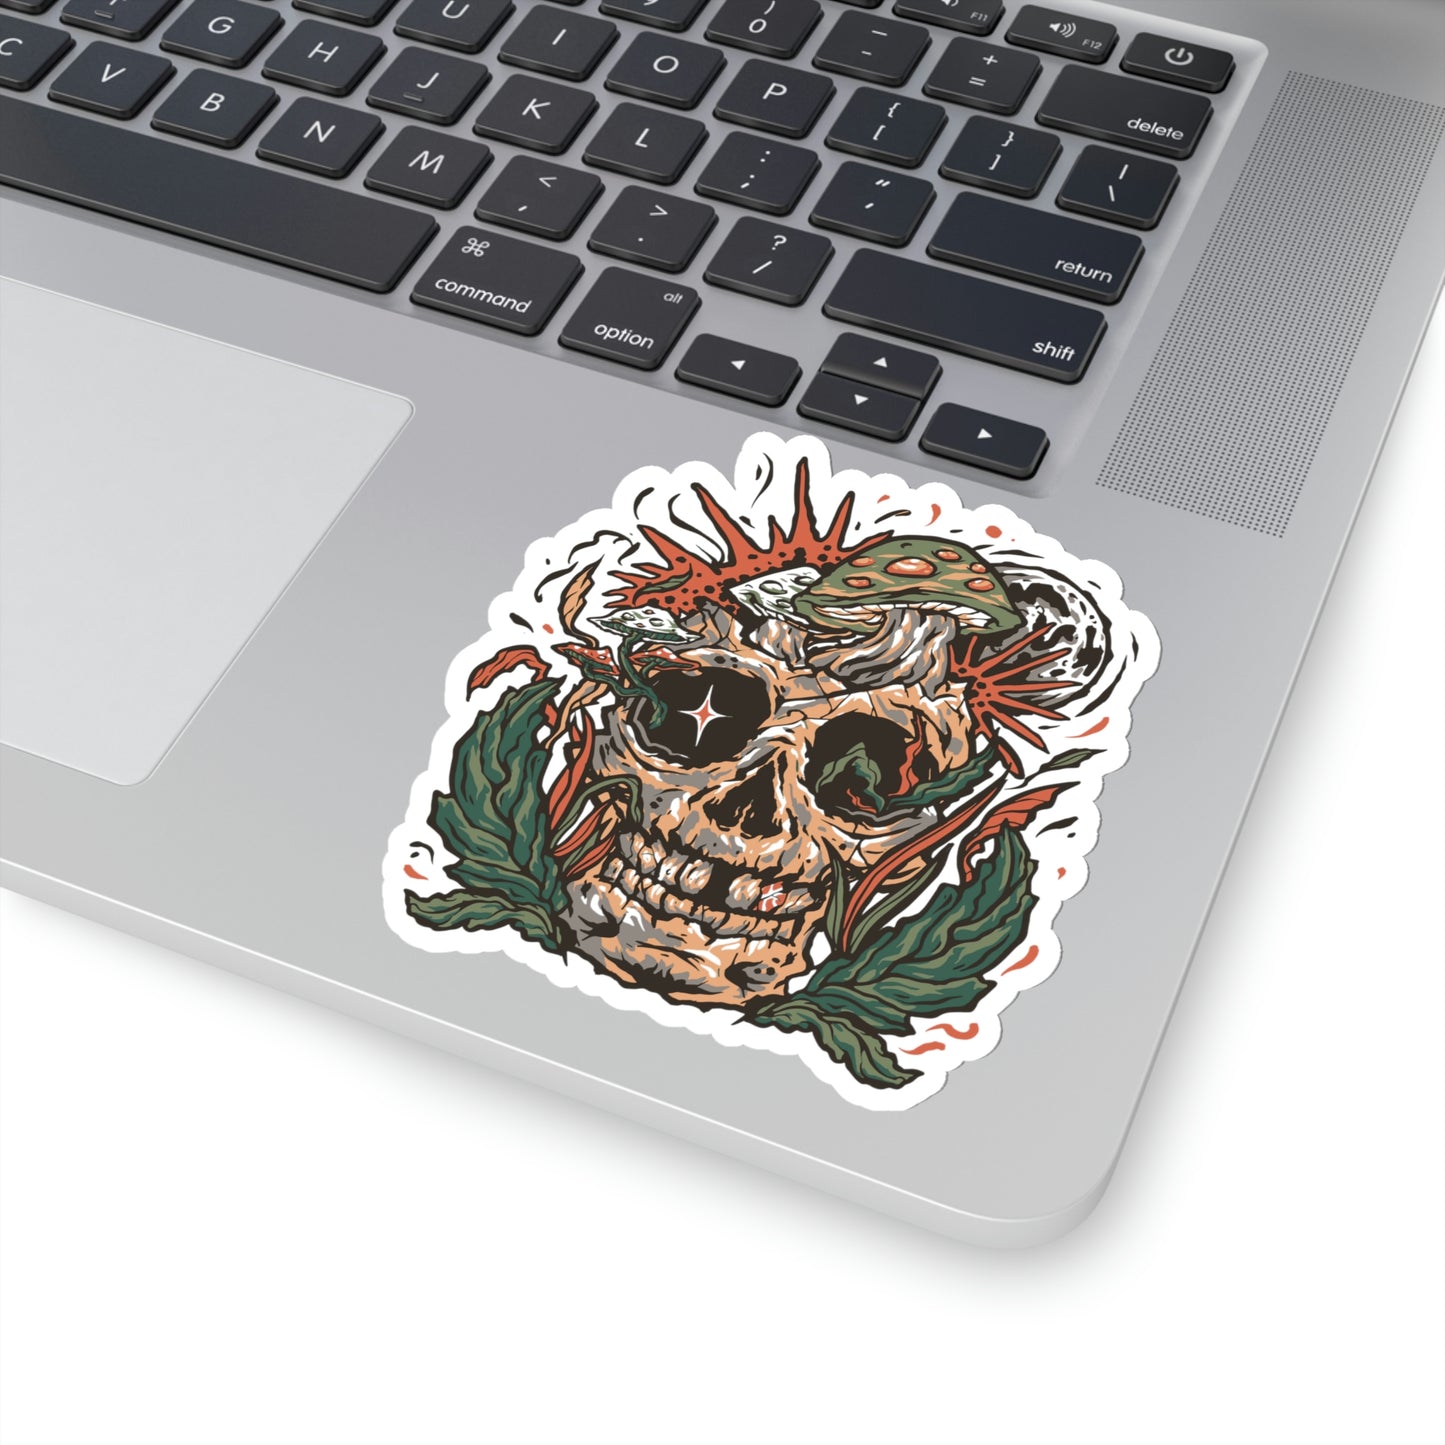 Cottagecore Skull and Mushrooms Floral Sticker